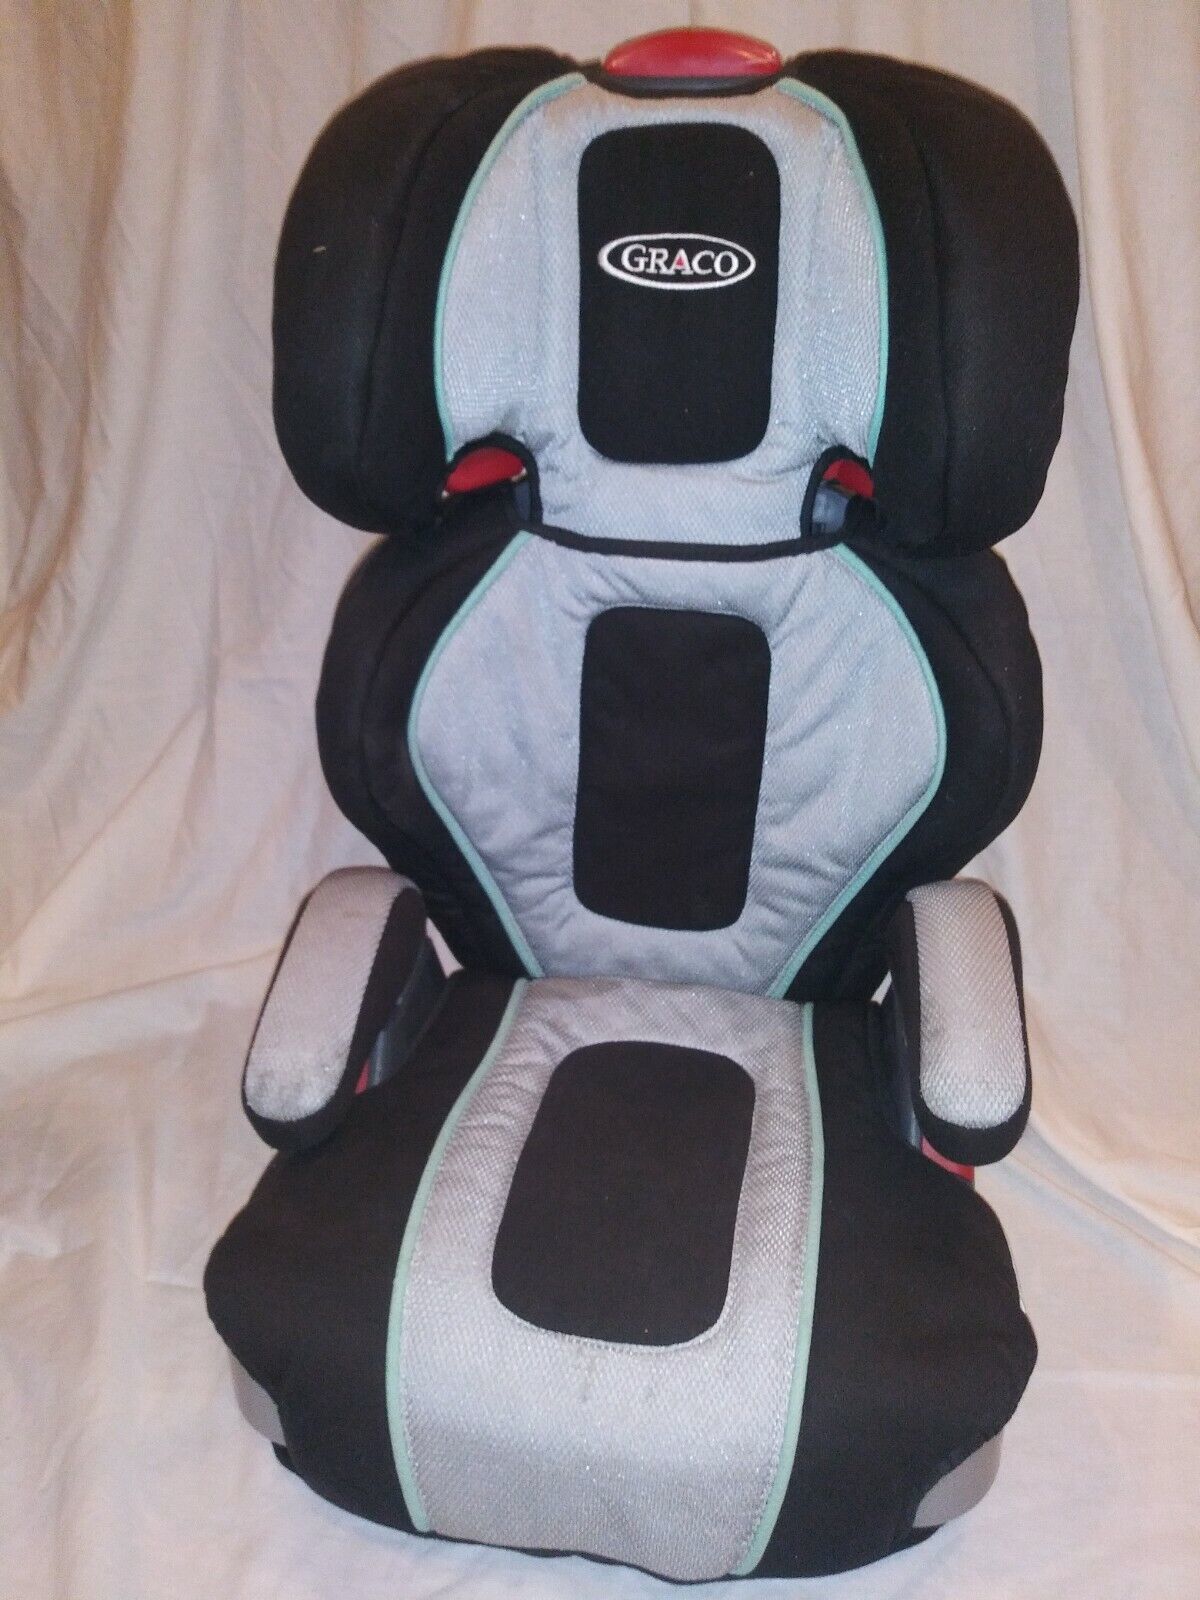 GRACO BOOSTER SEAT WITH HEIGHT AND WEIGHT ADJUSTABLE - $80.99